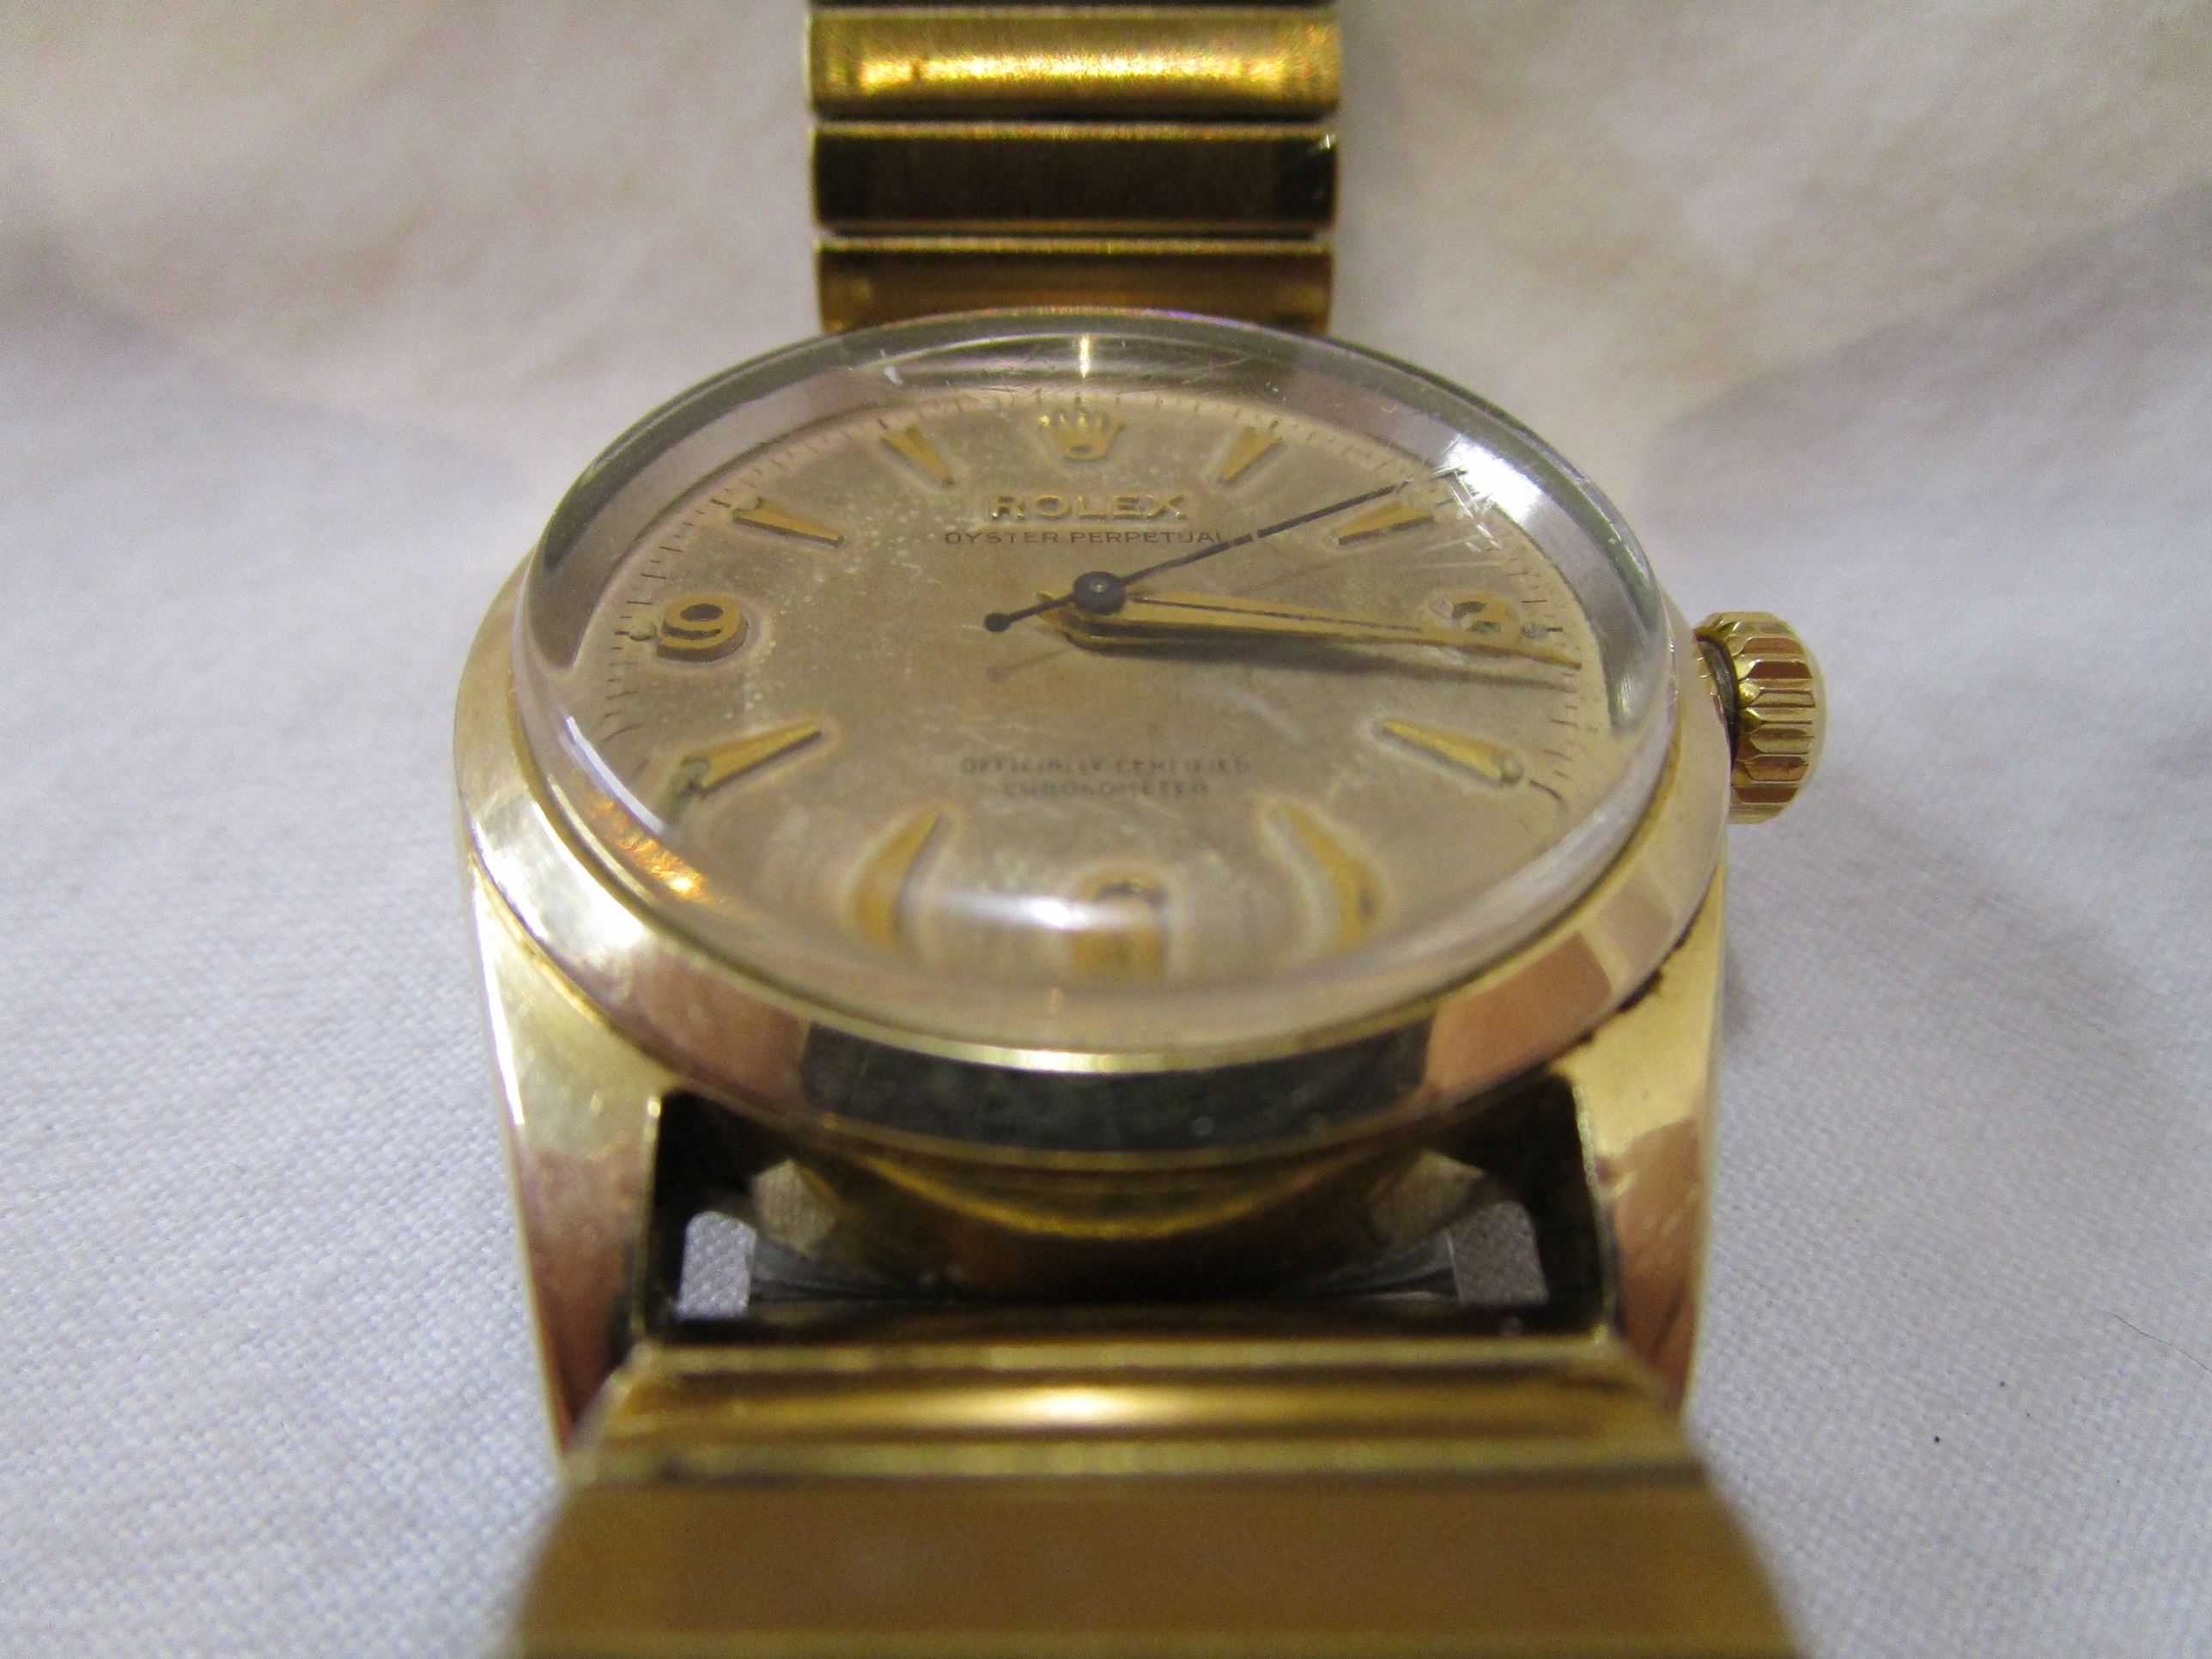 Rolex Oyster Perpetual working gents watch - 1967 model 6634 - Image 6 of 12